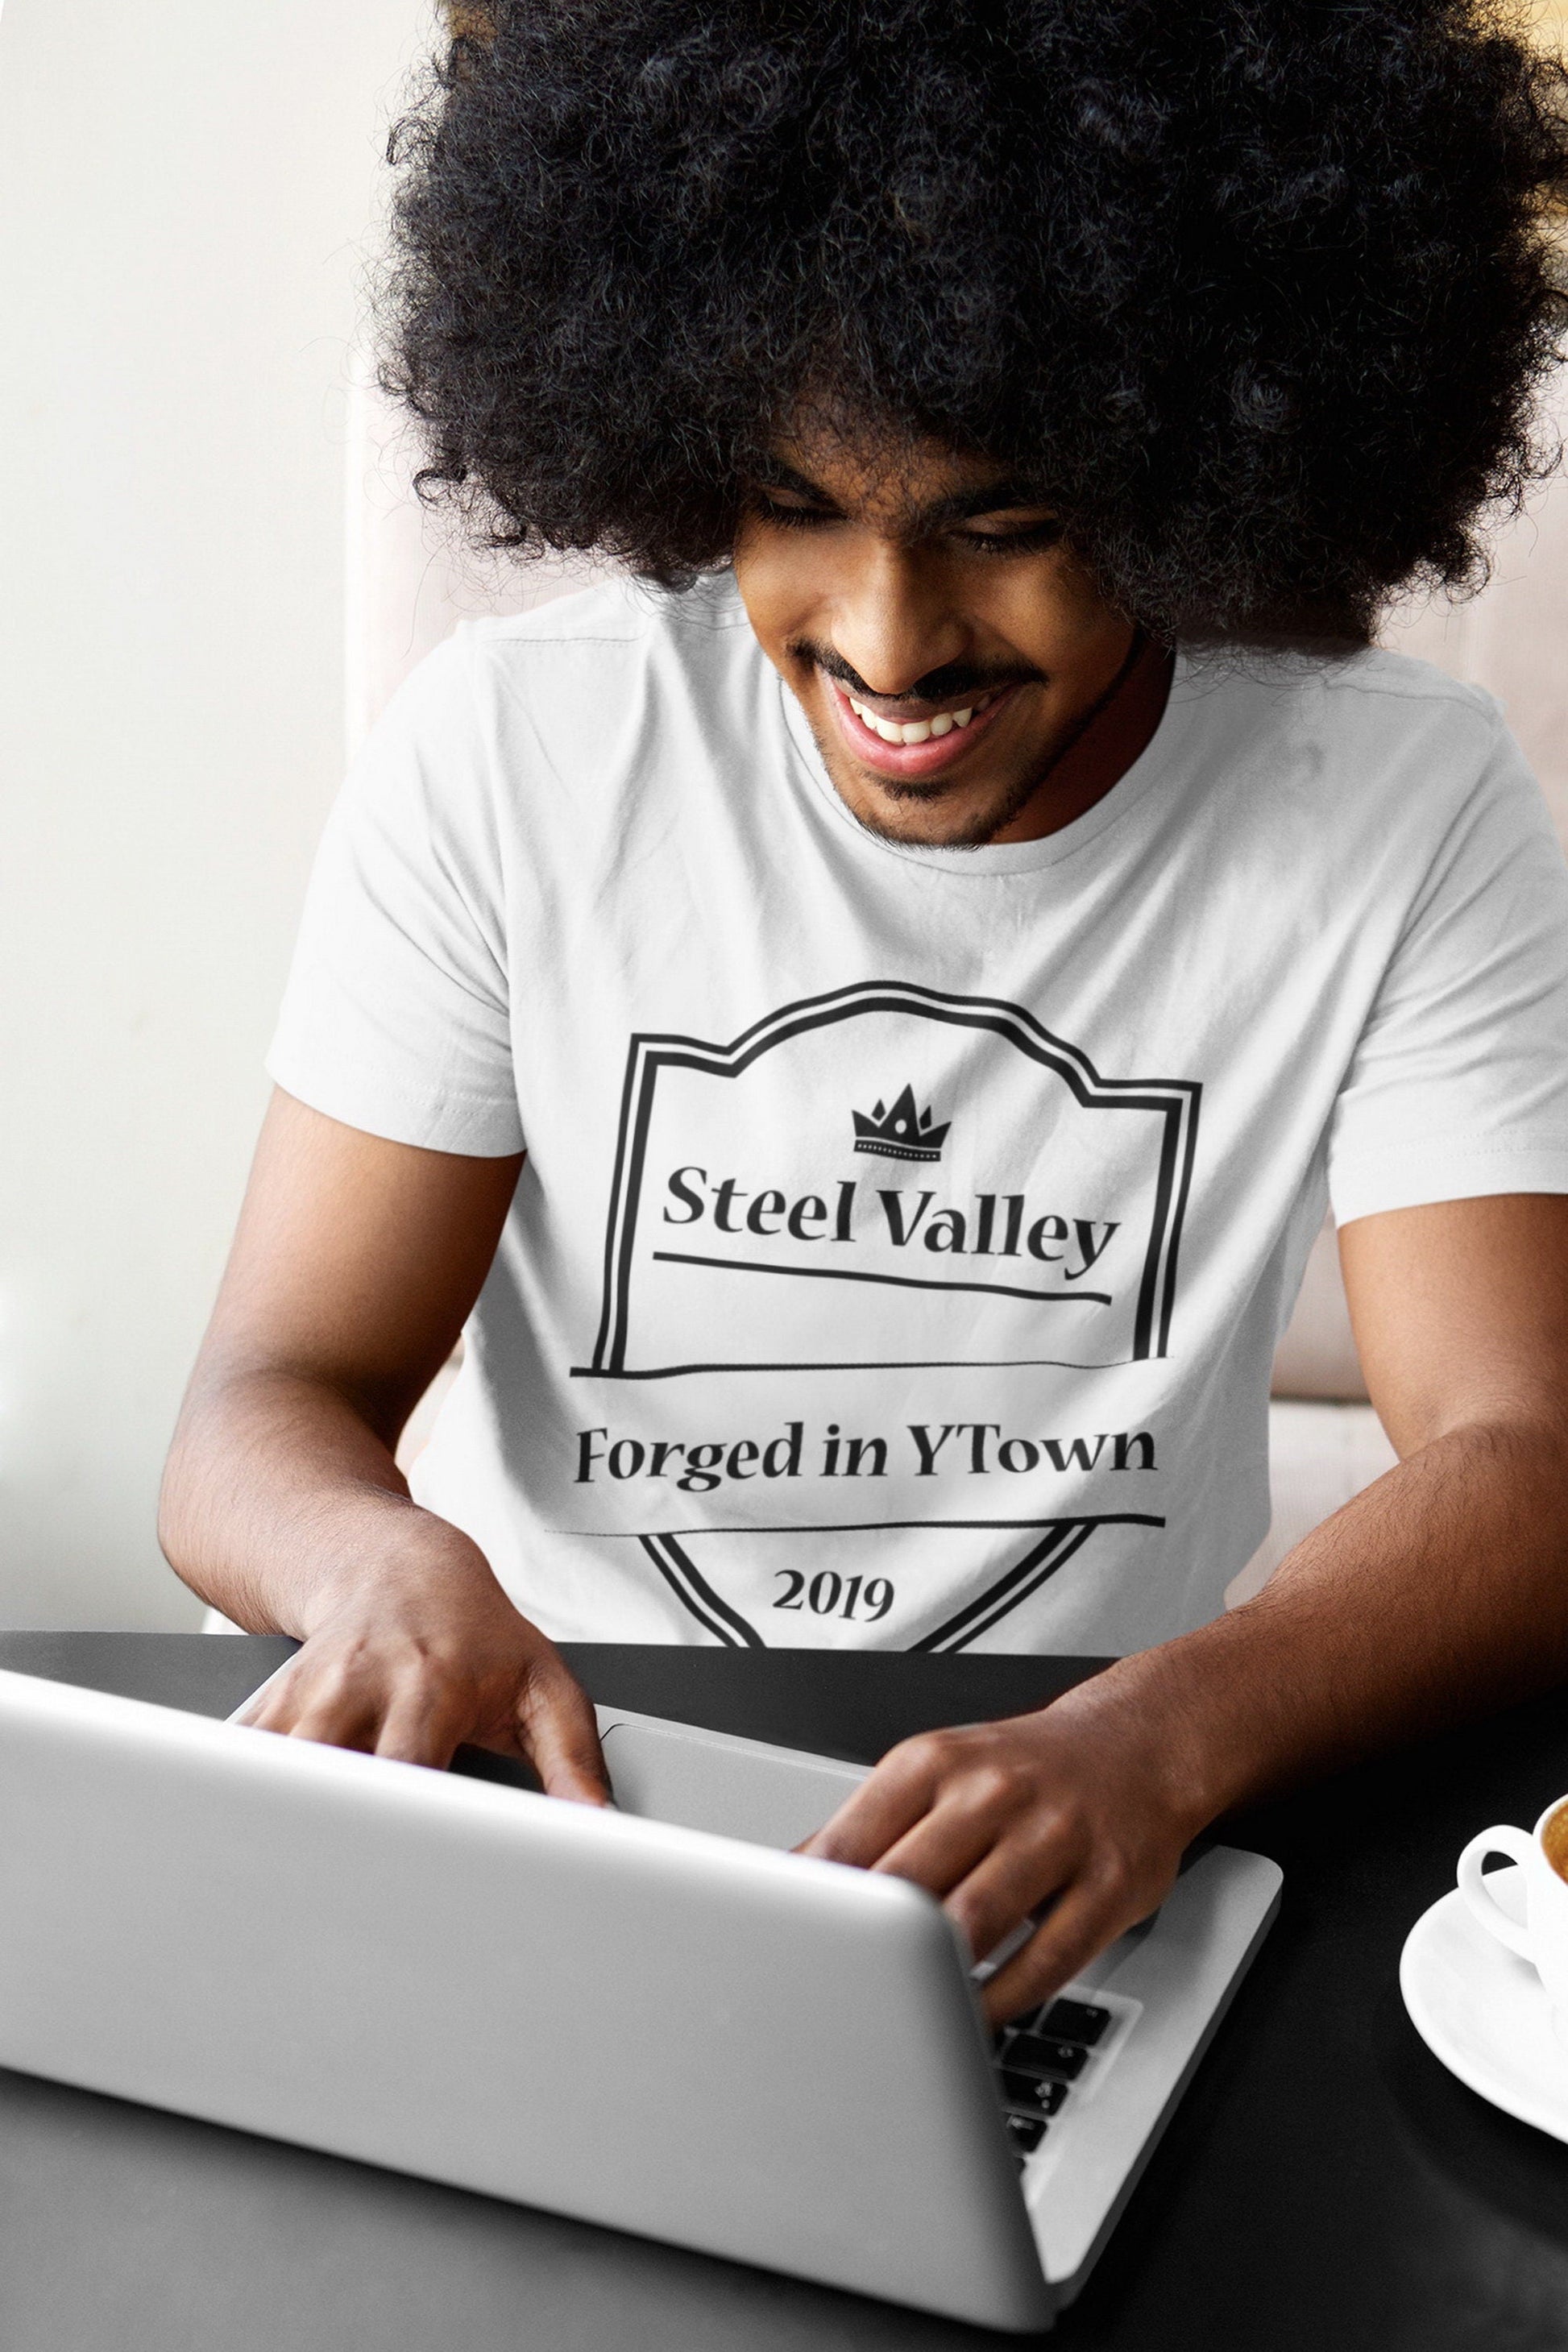 T-Shirt Vintage Steel Valley v1 Custom Shirt & Ink Color, Shirts and Tees, T-Shirt, Tees for Men and Women